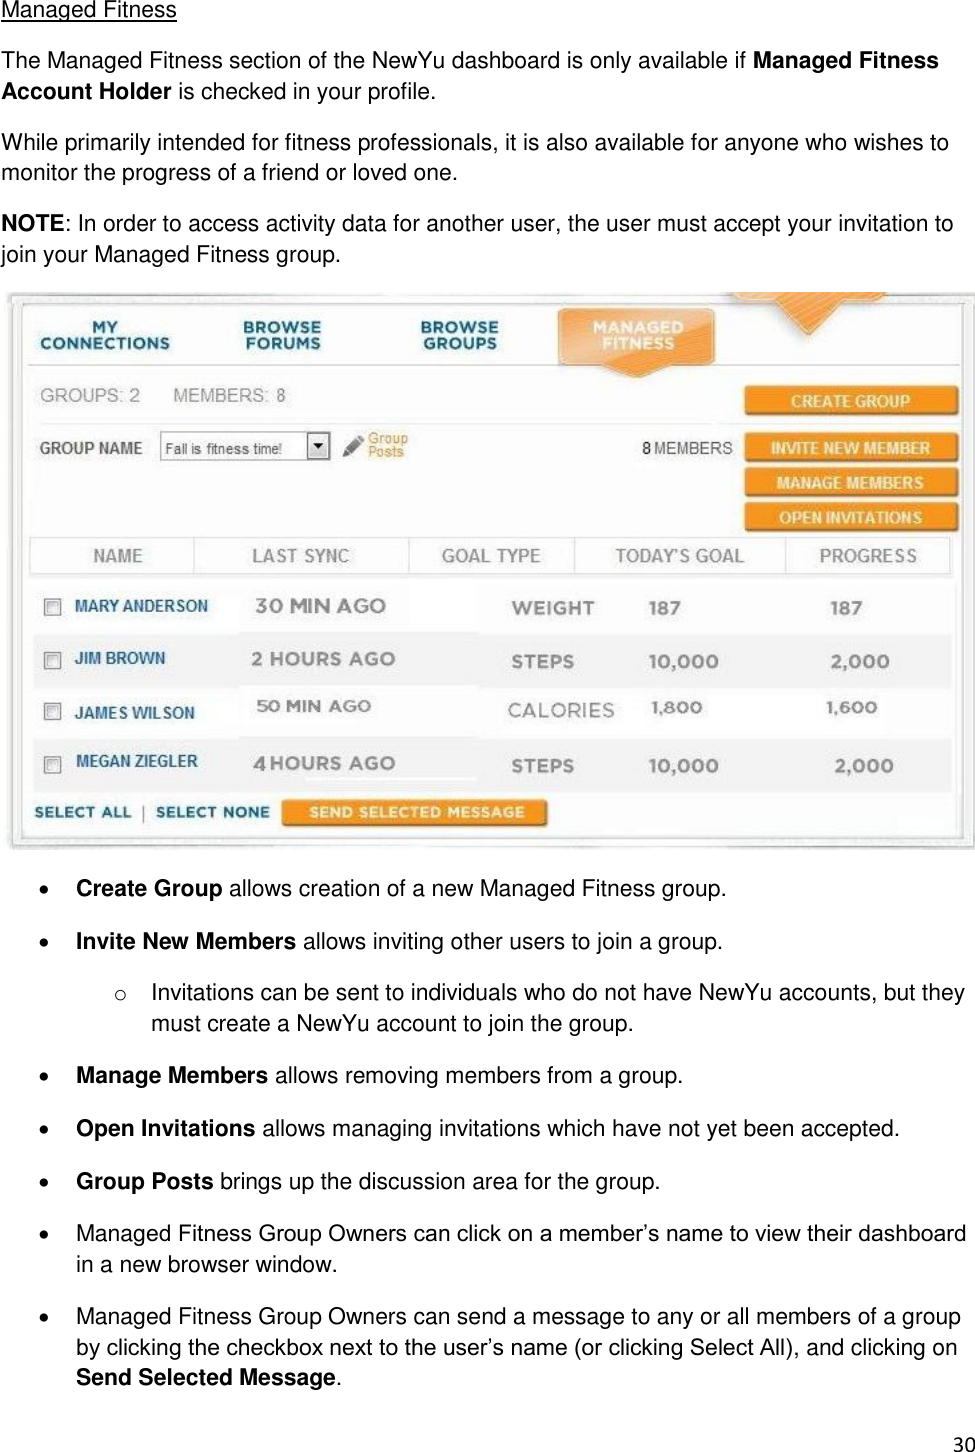 30 Managed Fitness The Managed Fitness section of the NewYu dashboard is only available if Managed Fitness Account Holder is checked in your profile. While primarily intended for fitness professionals, it is also available for anyone who wishes to monitor the progress of a friend or loved one. NOTE: In order to access activity data for another user, the user must accept your invitation to join your Managed Fitness group.   Create Group allows creation of a new Managed Fitness group.  Invite New Members allows inviting other users to join a group. o  Invitations can be sent to individuals who do not have NewYu accounts, but they must create a NewYu account to join the group.  Manage Members allows removing members from a group.  Open Invitations allows managing invitations which have not yet been accepted.  Group Posts brings up the discussion area for the group.   Managed Fitness Group Owners can click on a member’s name to view their dashboard in a new browser window.   Managed Fitness Group Owners can send a message to any or all members of a group by clicking the checkbox next to the user’s name (or clicking Select All), and clicking on Send Selected Message. 